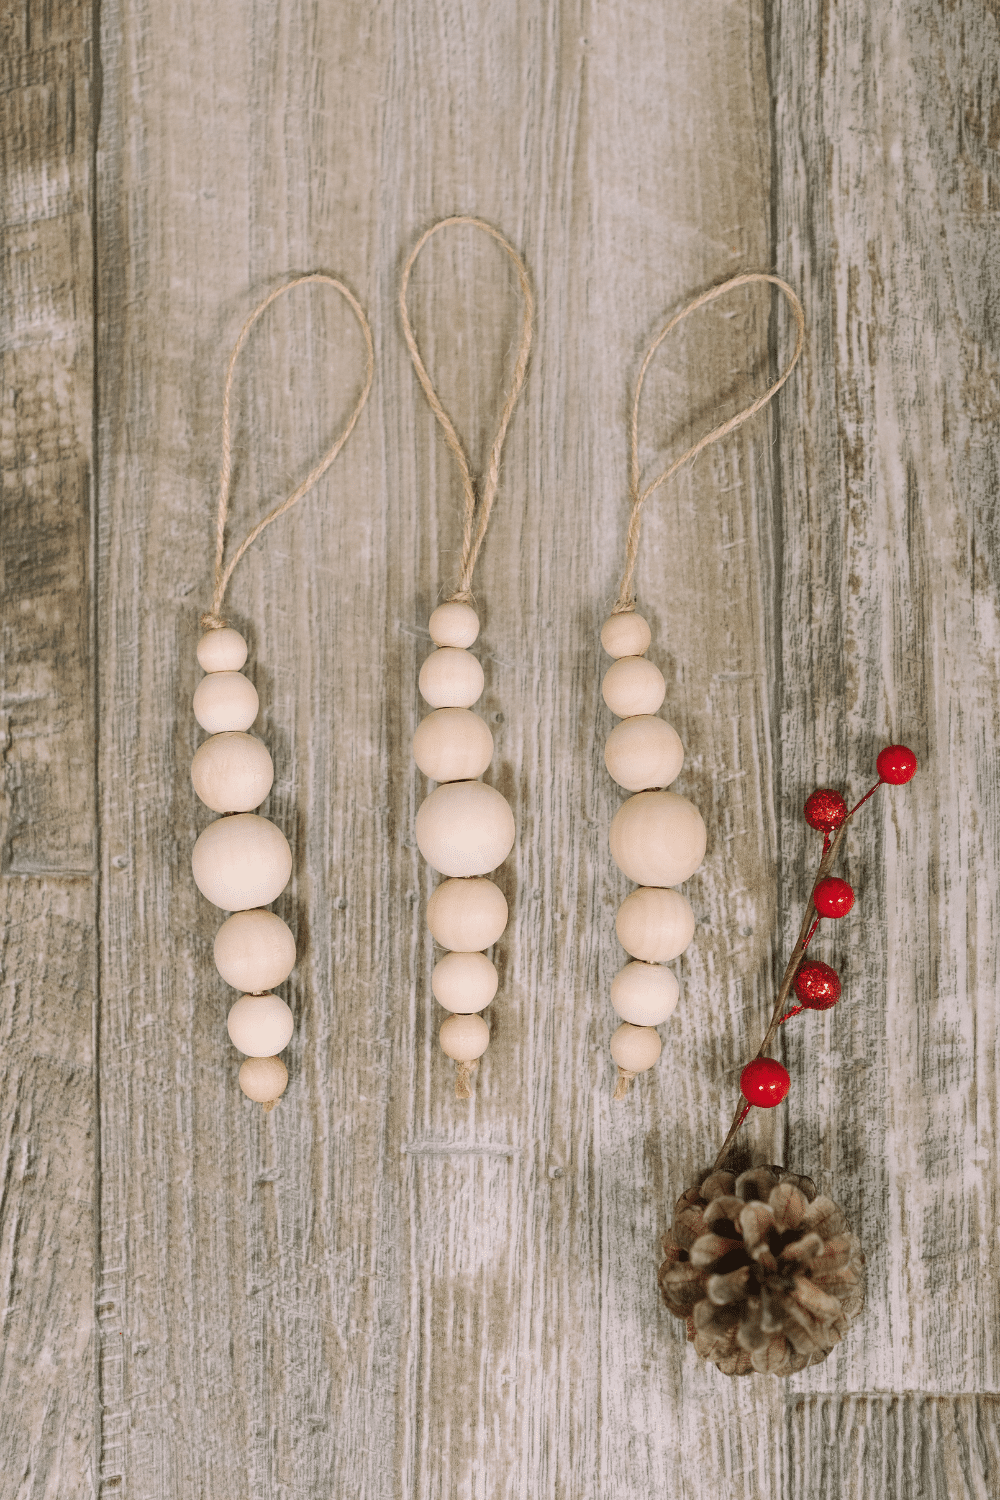 How to Make Wood Bead Ornaments